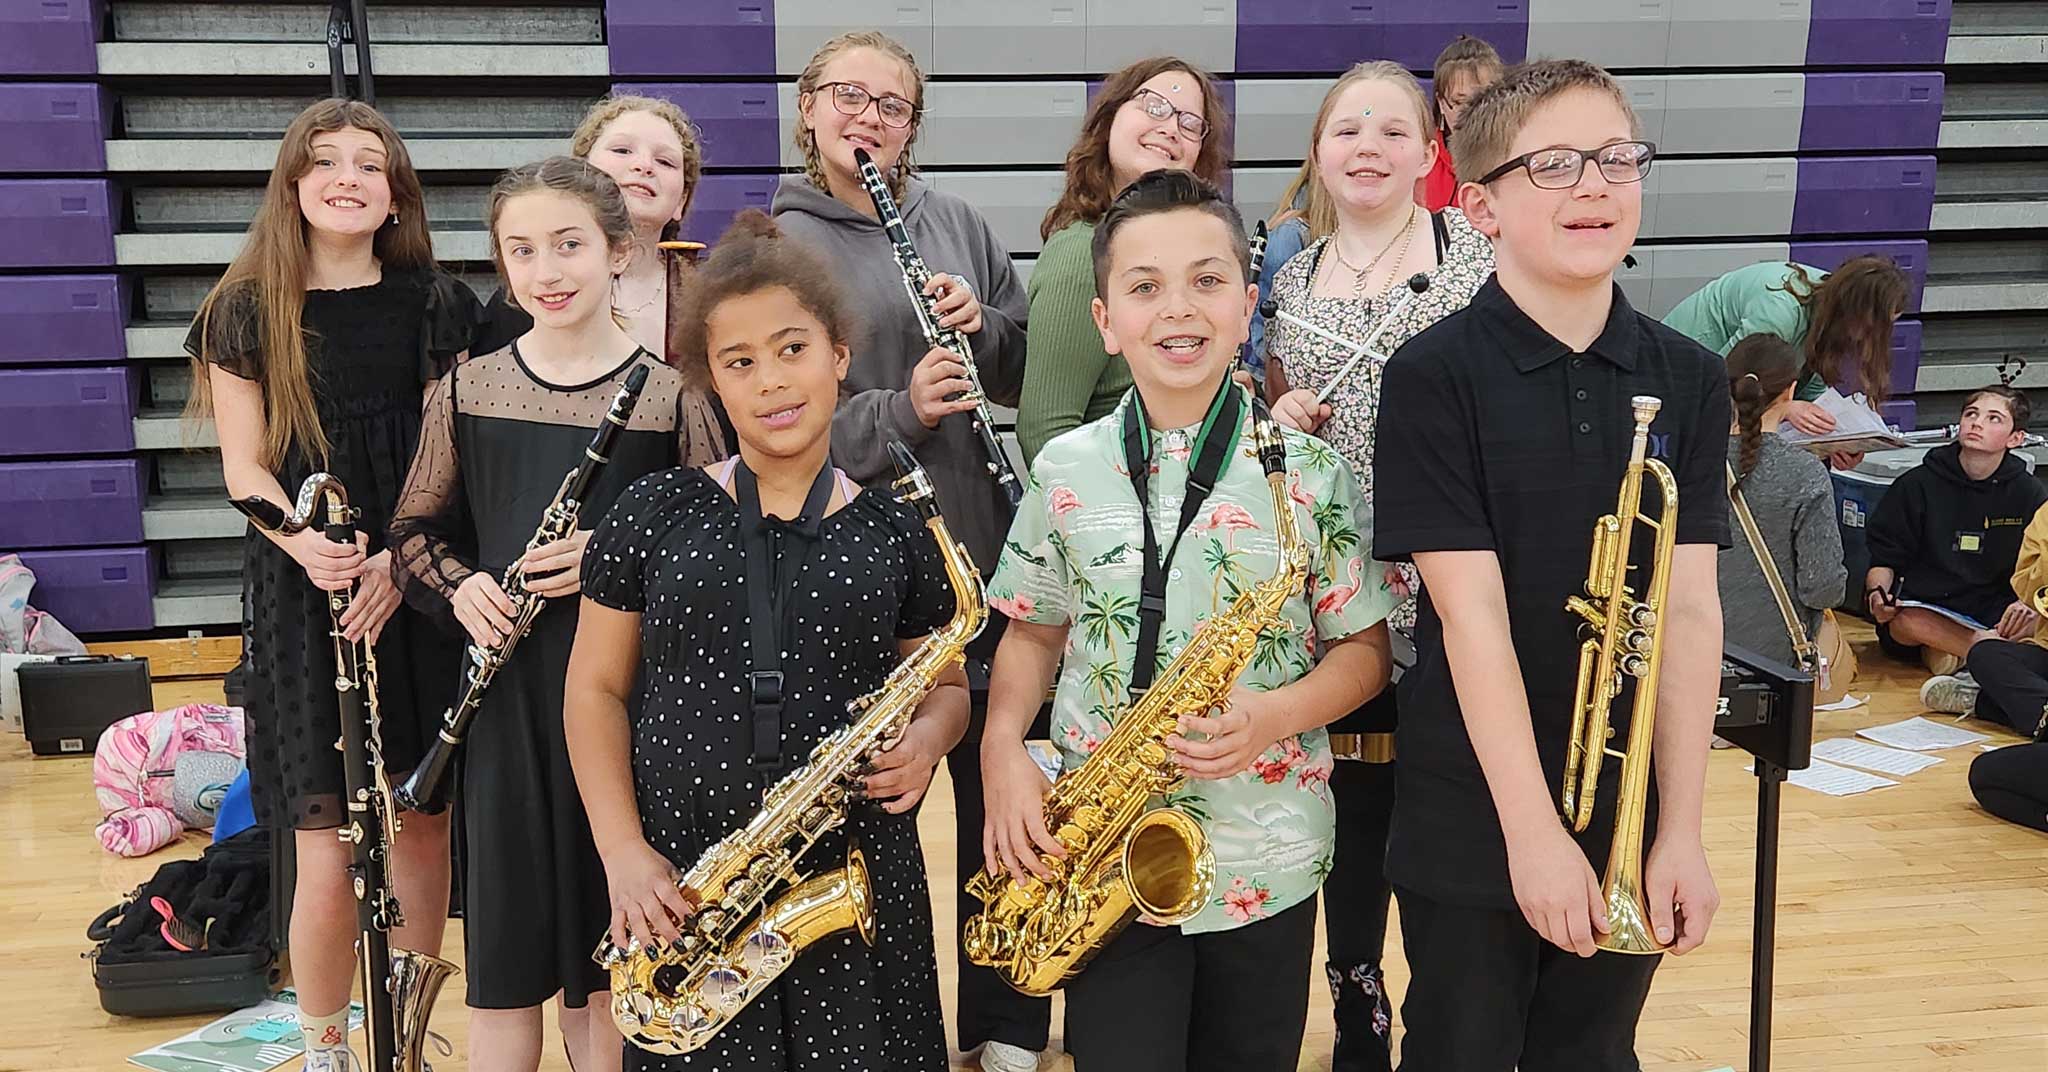 Members of the elementary band, wearing concert attire stand together. Many are holding their instruments.